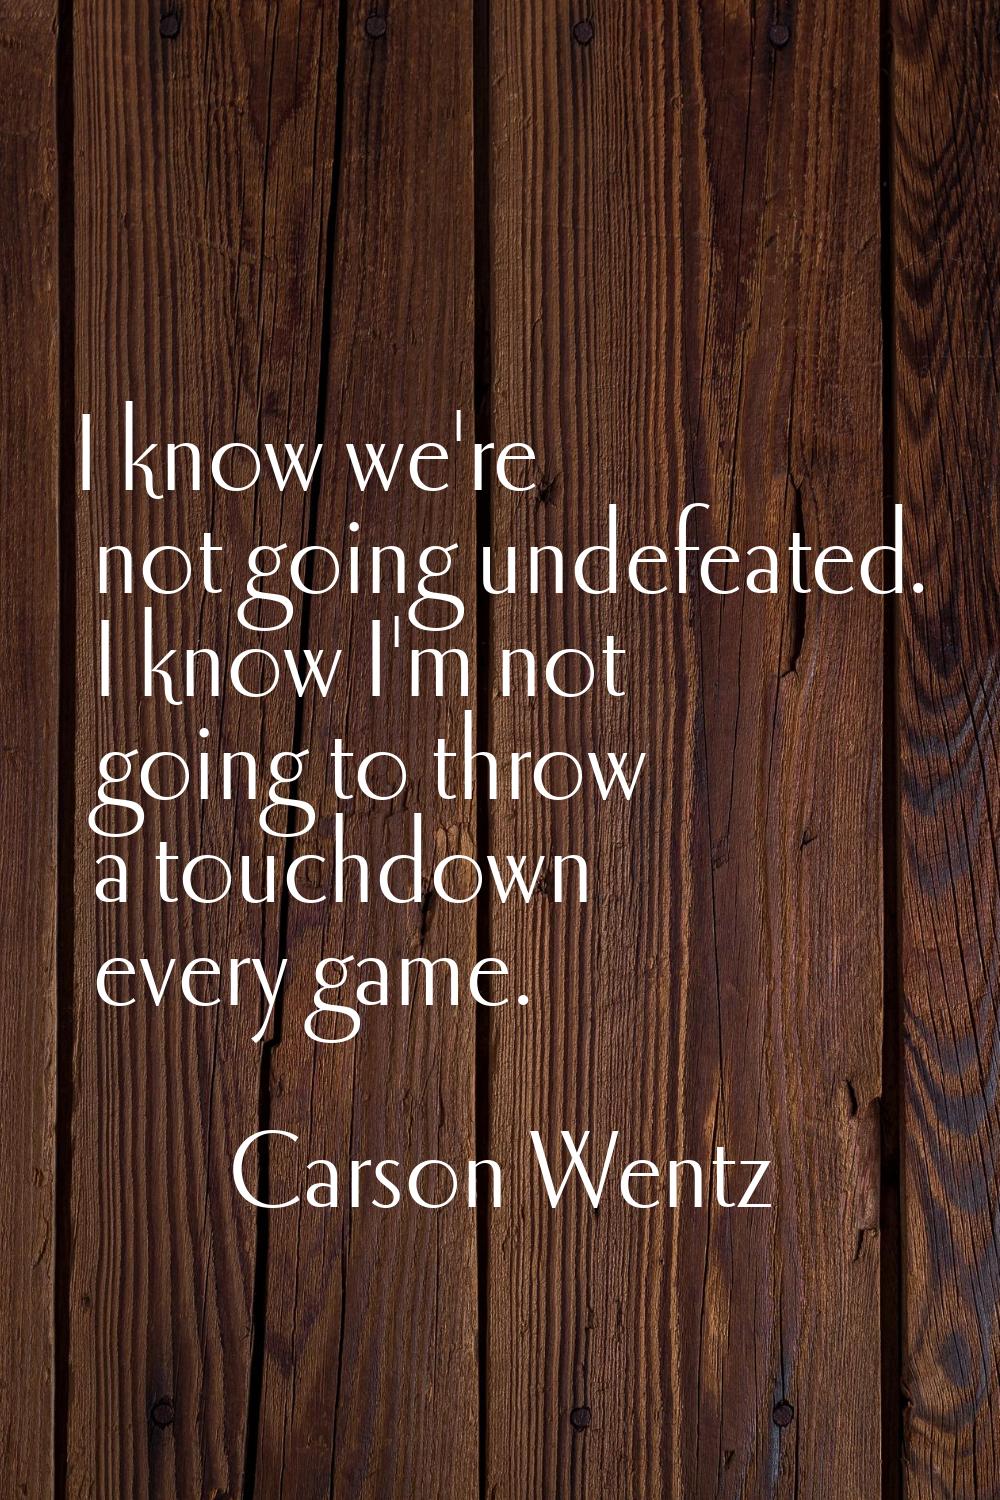 I know we're not going undefeated. I know I'm not going to throw a touchdown every game.